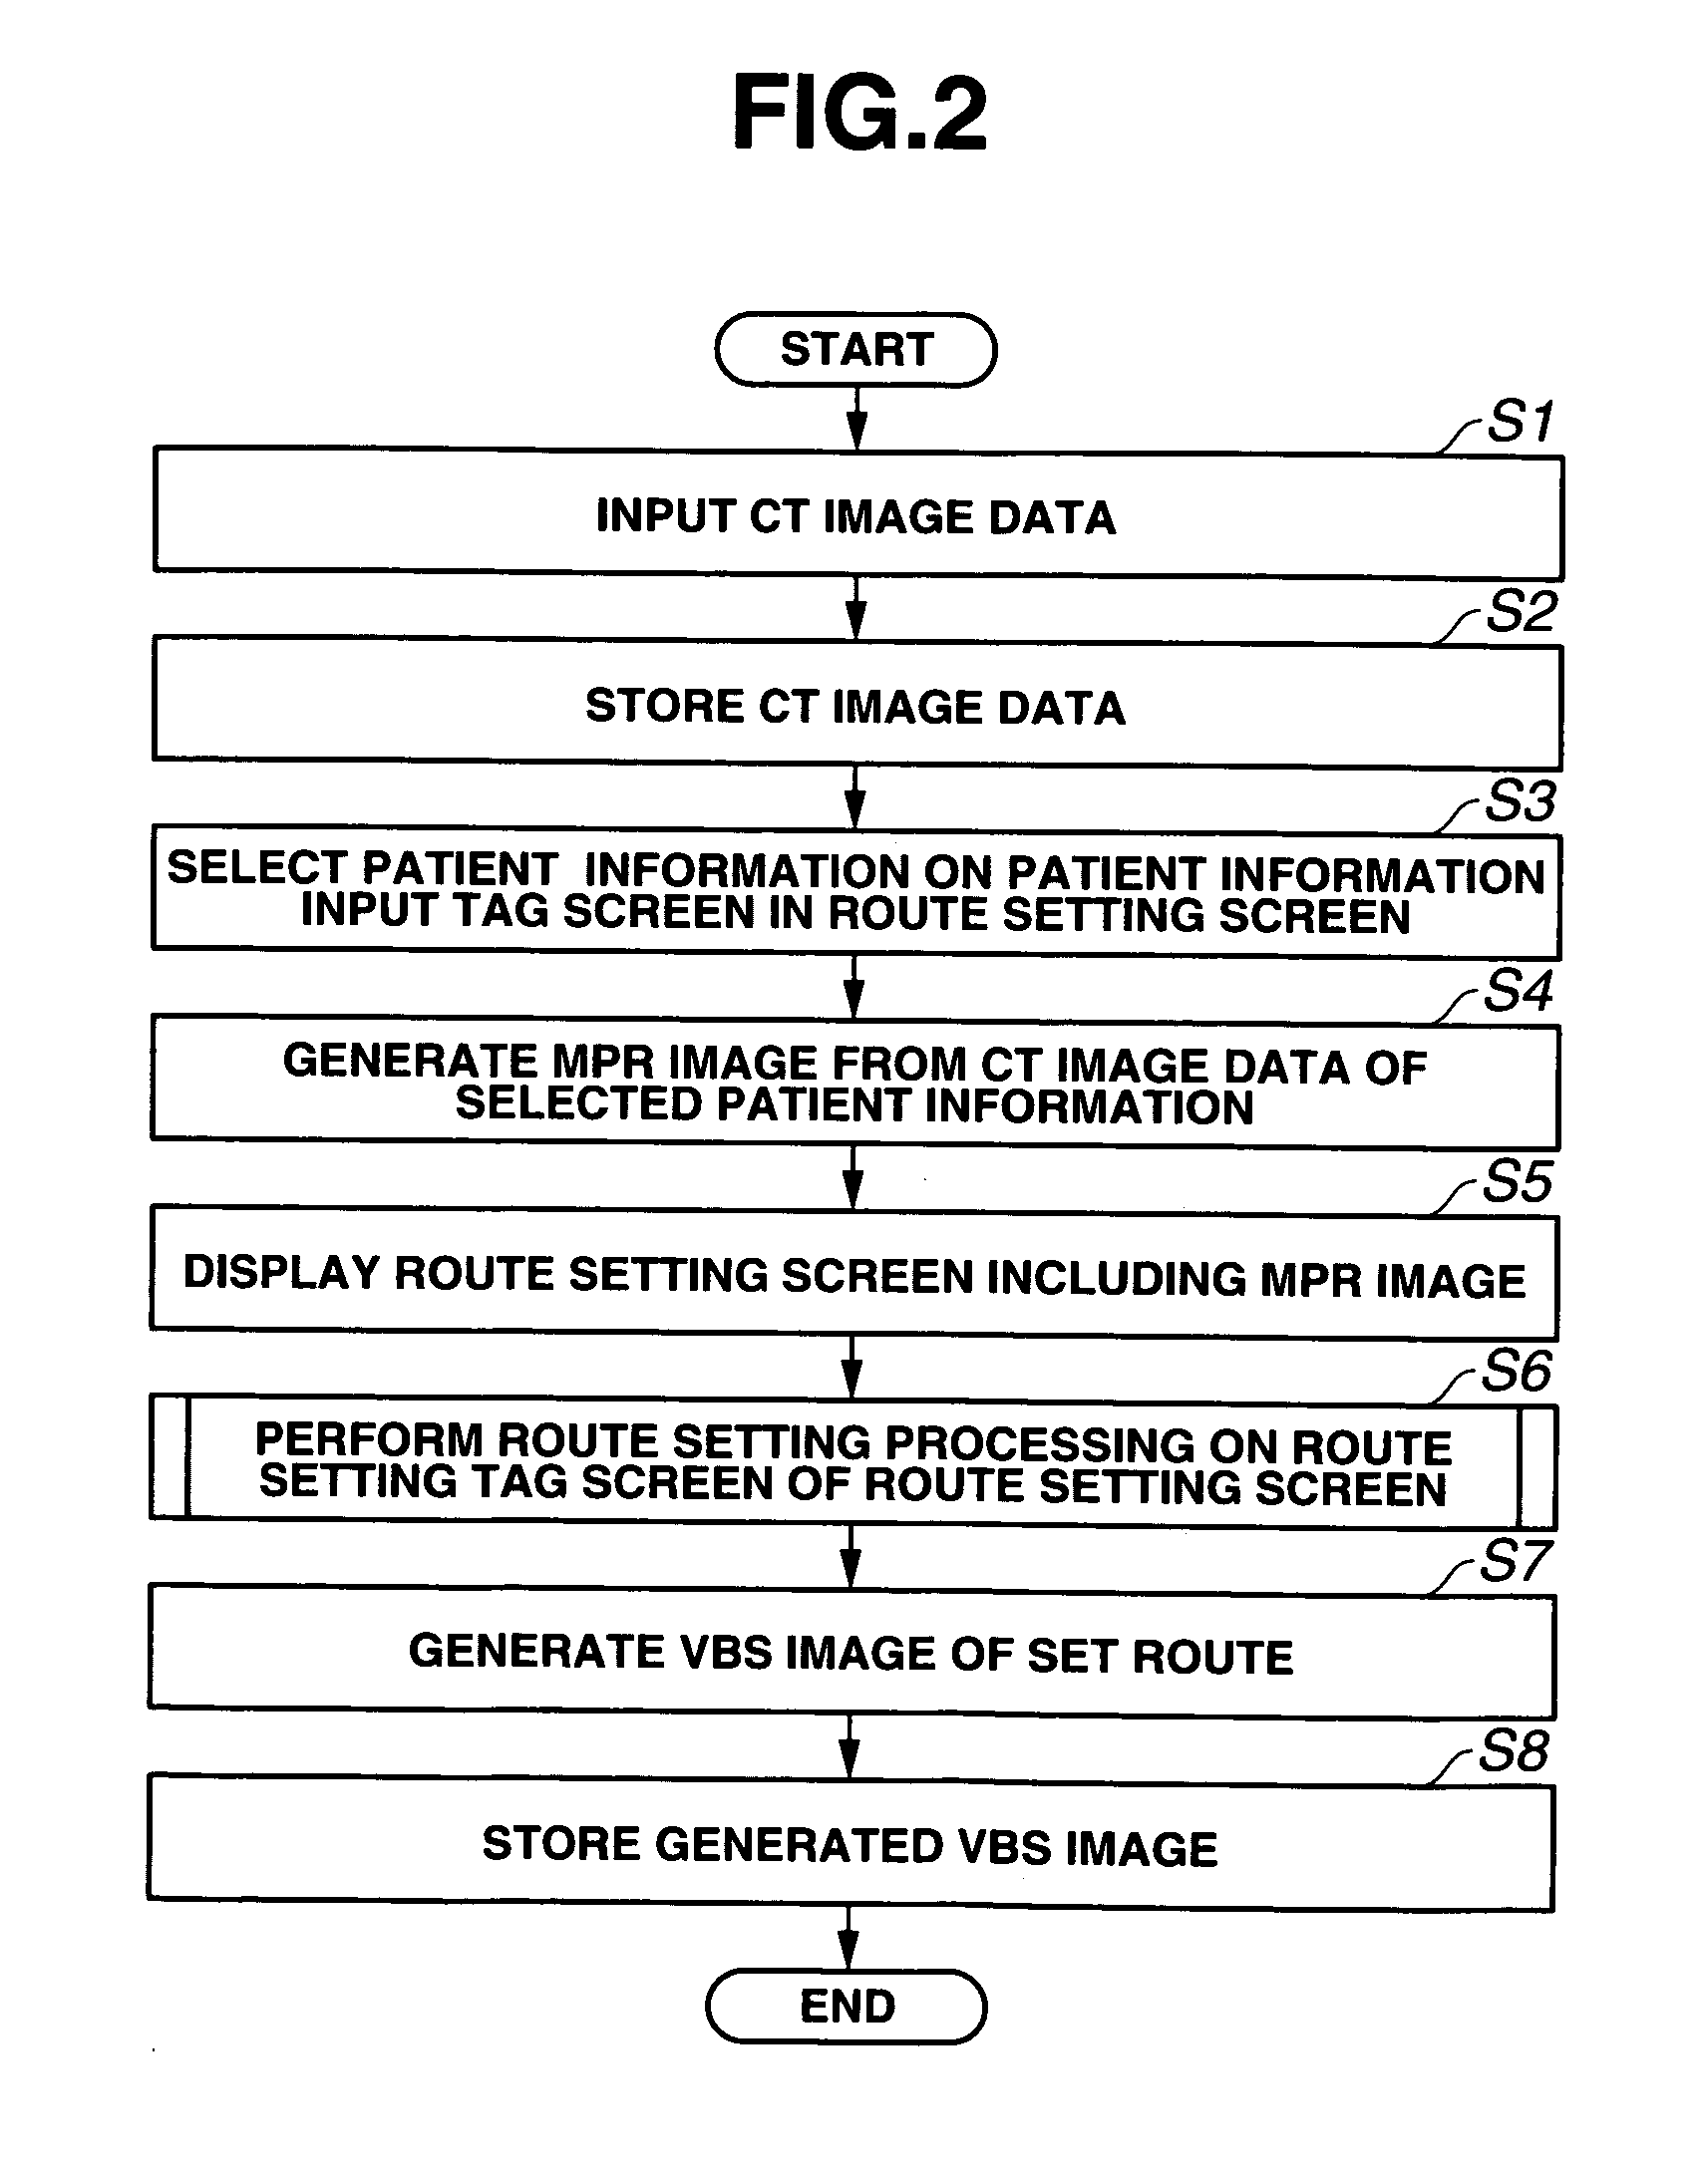 Insertion support system for specifying a location of interest as an arbitrary region and also appropriately setting a navigation leading to the specified region